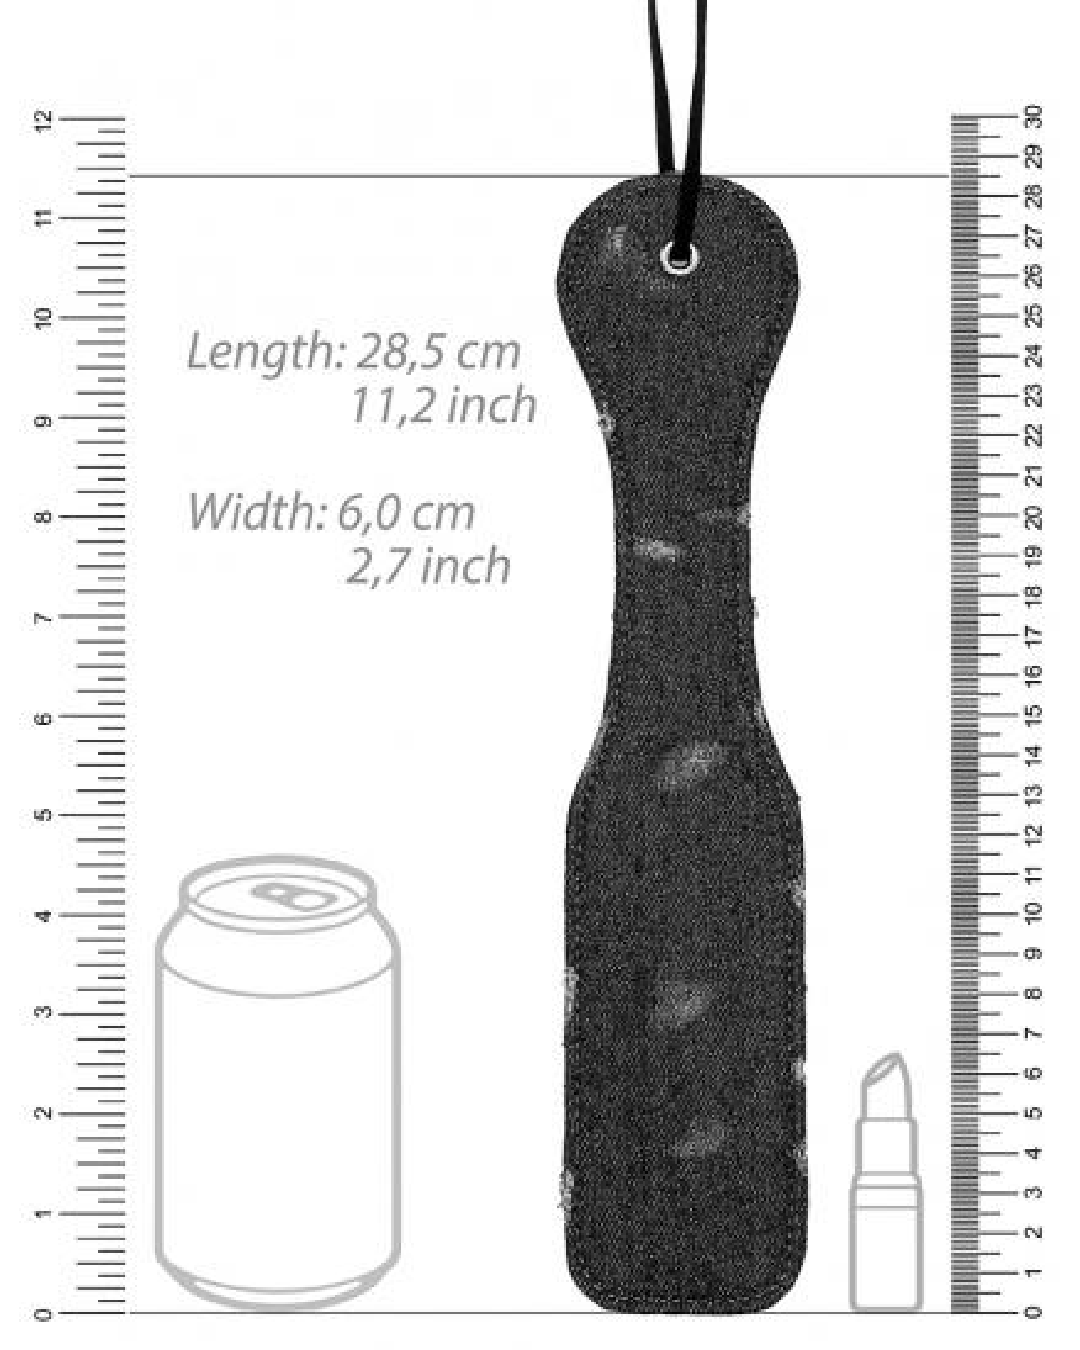 Ouch! Roughend Denim Style Paddle - Black graphic of product and size 